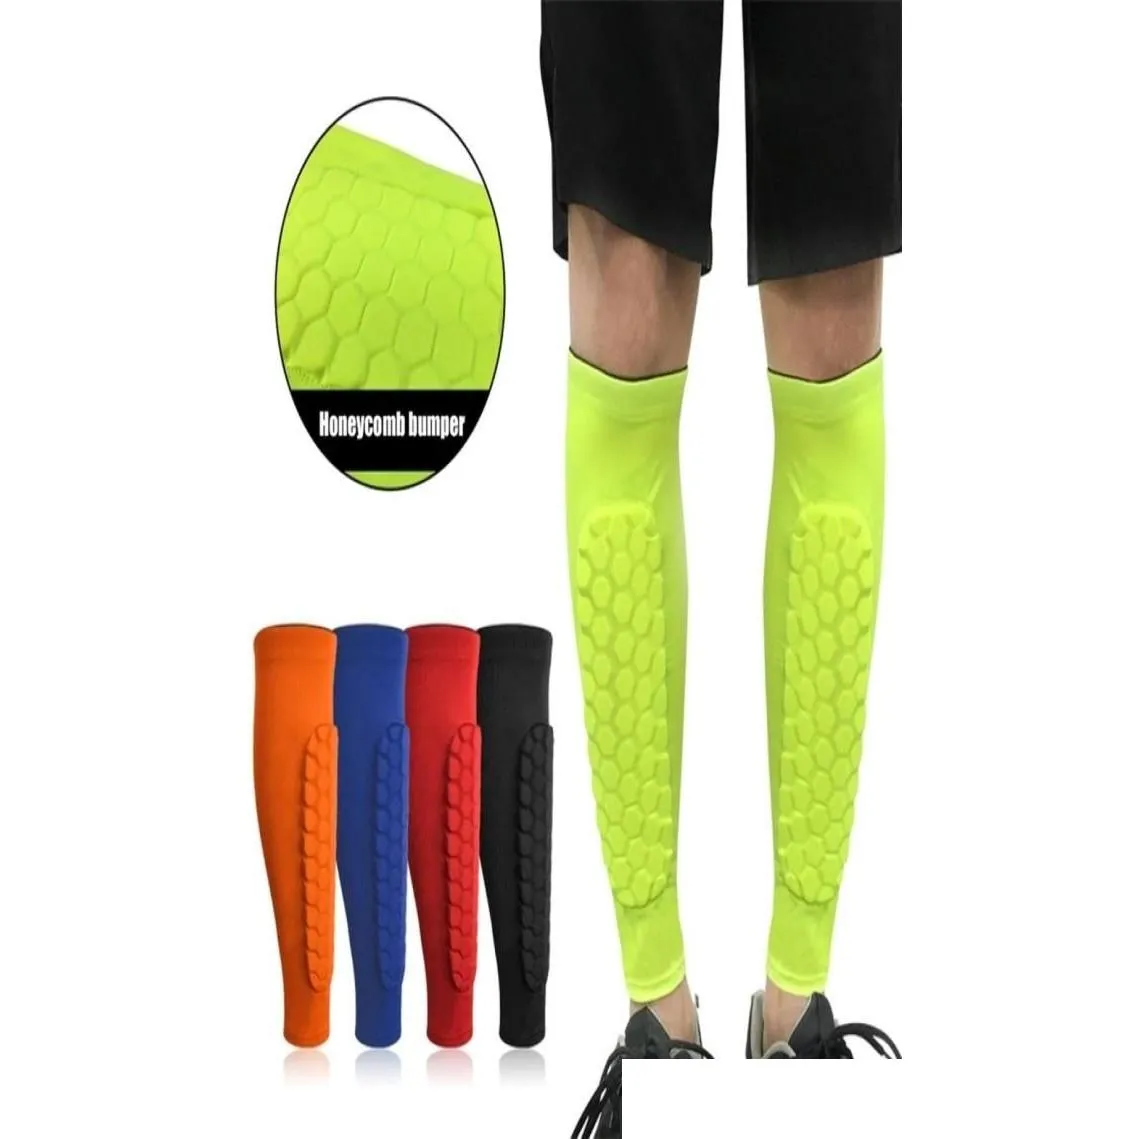 1PC Honeycomb Shields Soccer Guard Football Legging Shin Pads Leg Sleeves Adult Support Protective Gear Canilleras 2206166657418